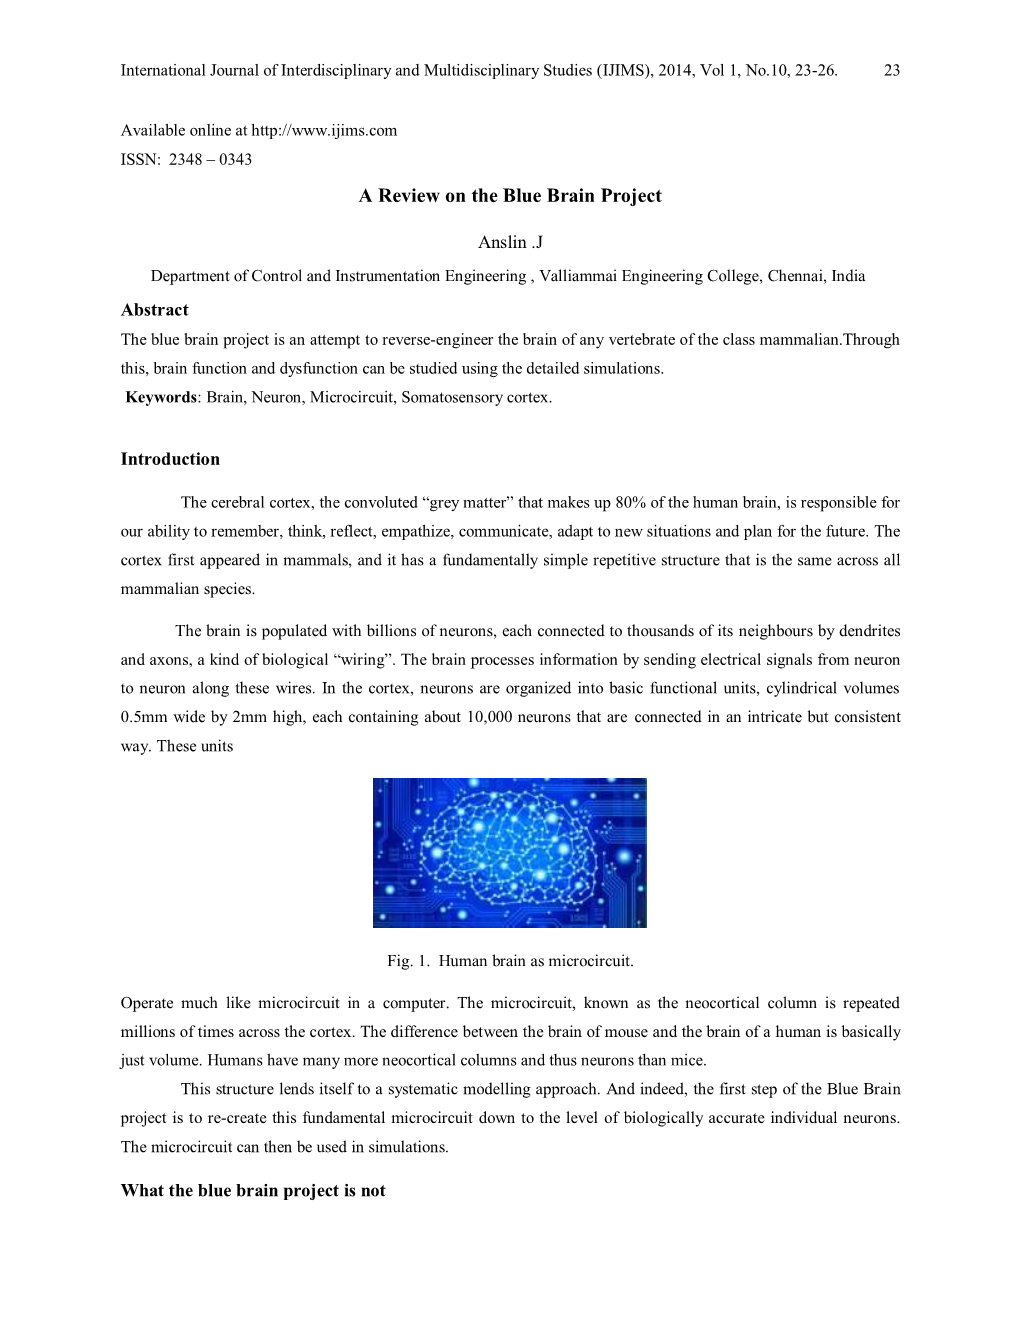 4. a Review on the Blue Brain Project (2650 Downloads)